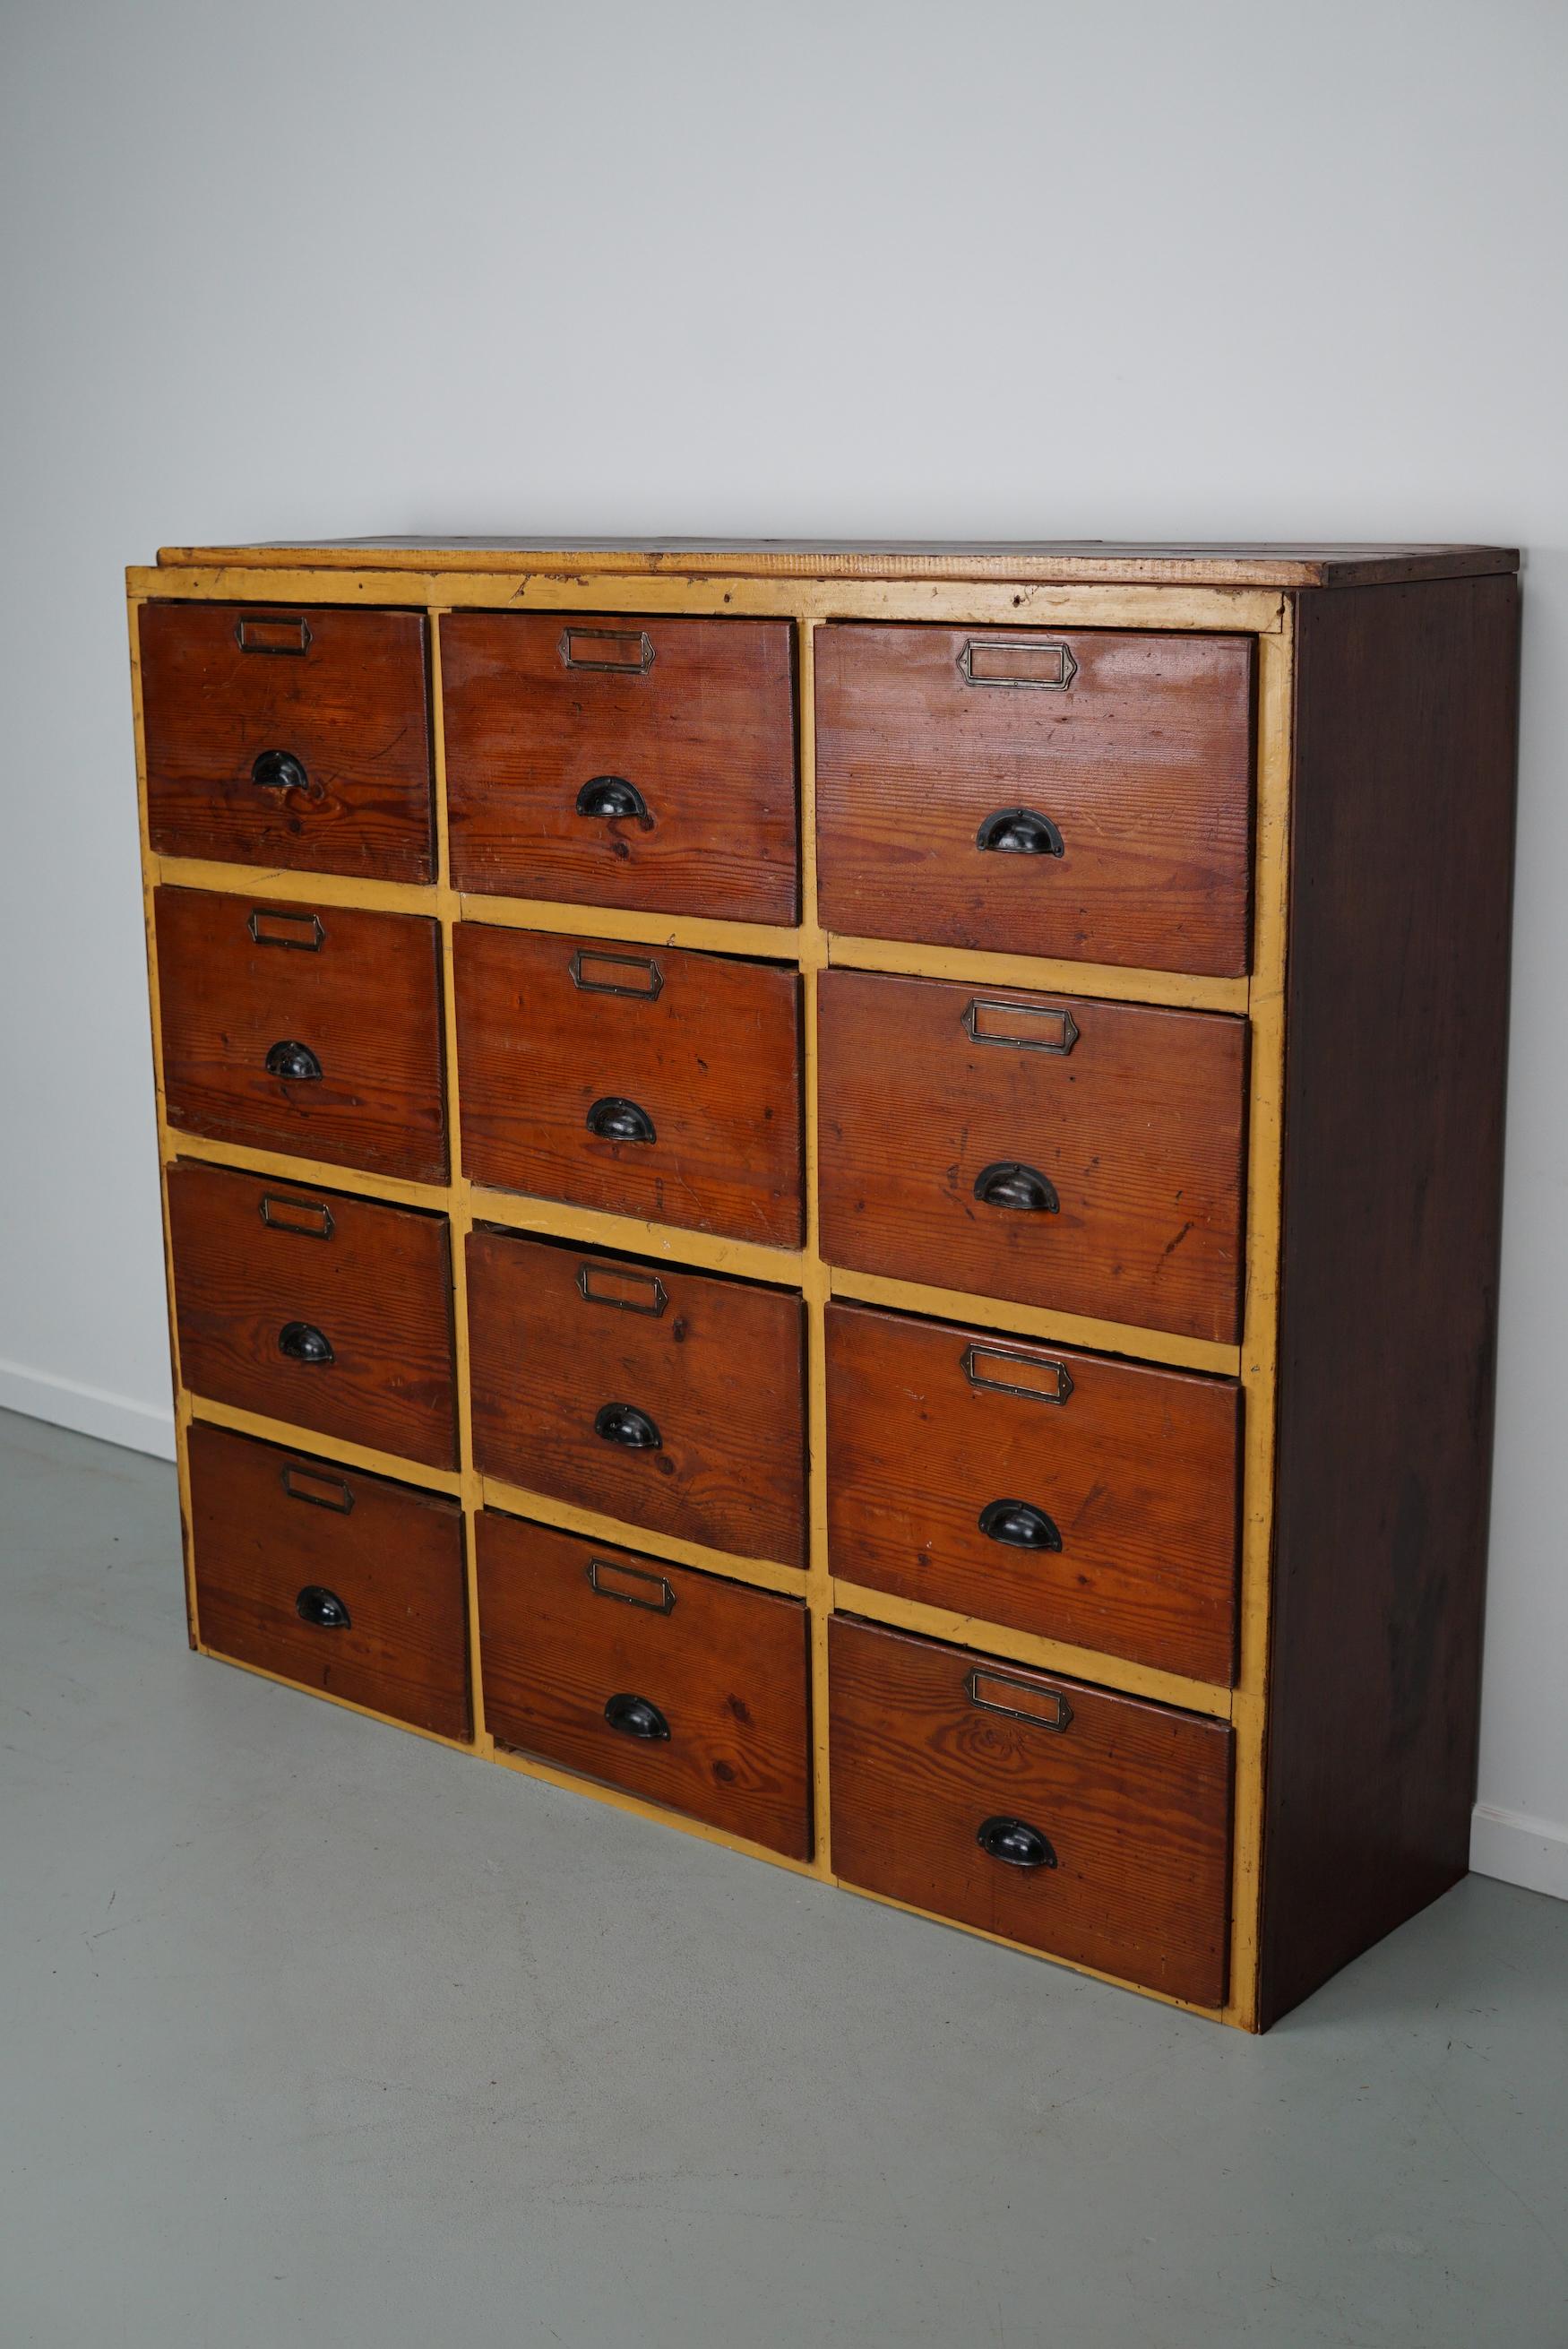 This workshop cabinet was made from pine in the Netherlands circa 1930s and it was used in a workshop for dentist equipment. It features 12 very large drawers with black handles. The interior dimensions of the drawers are: DWH 35 x 41 x 26 cm. The